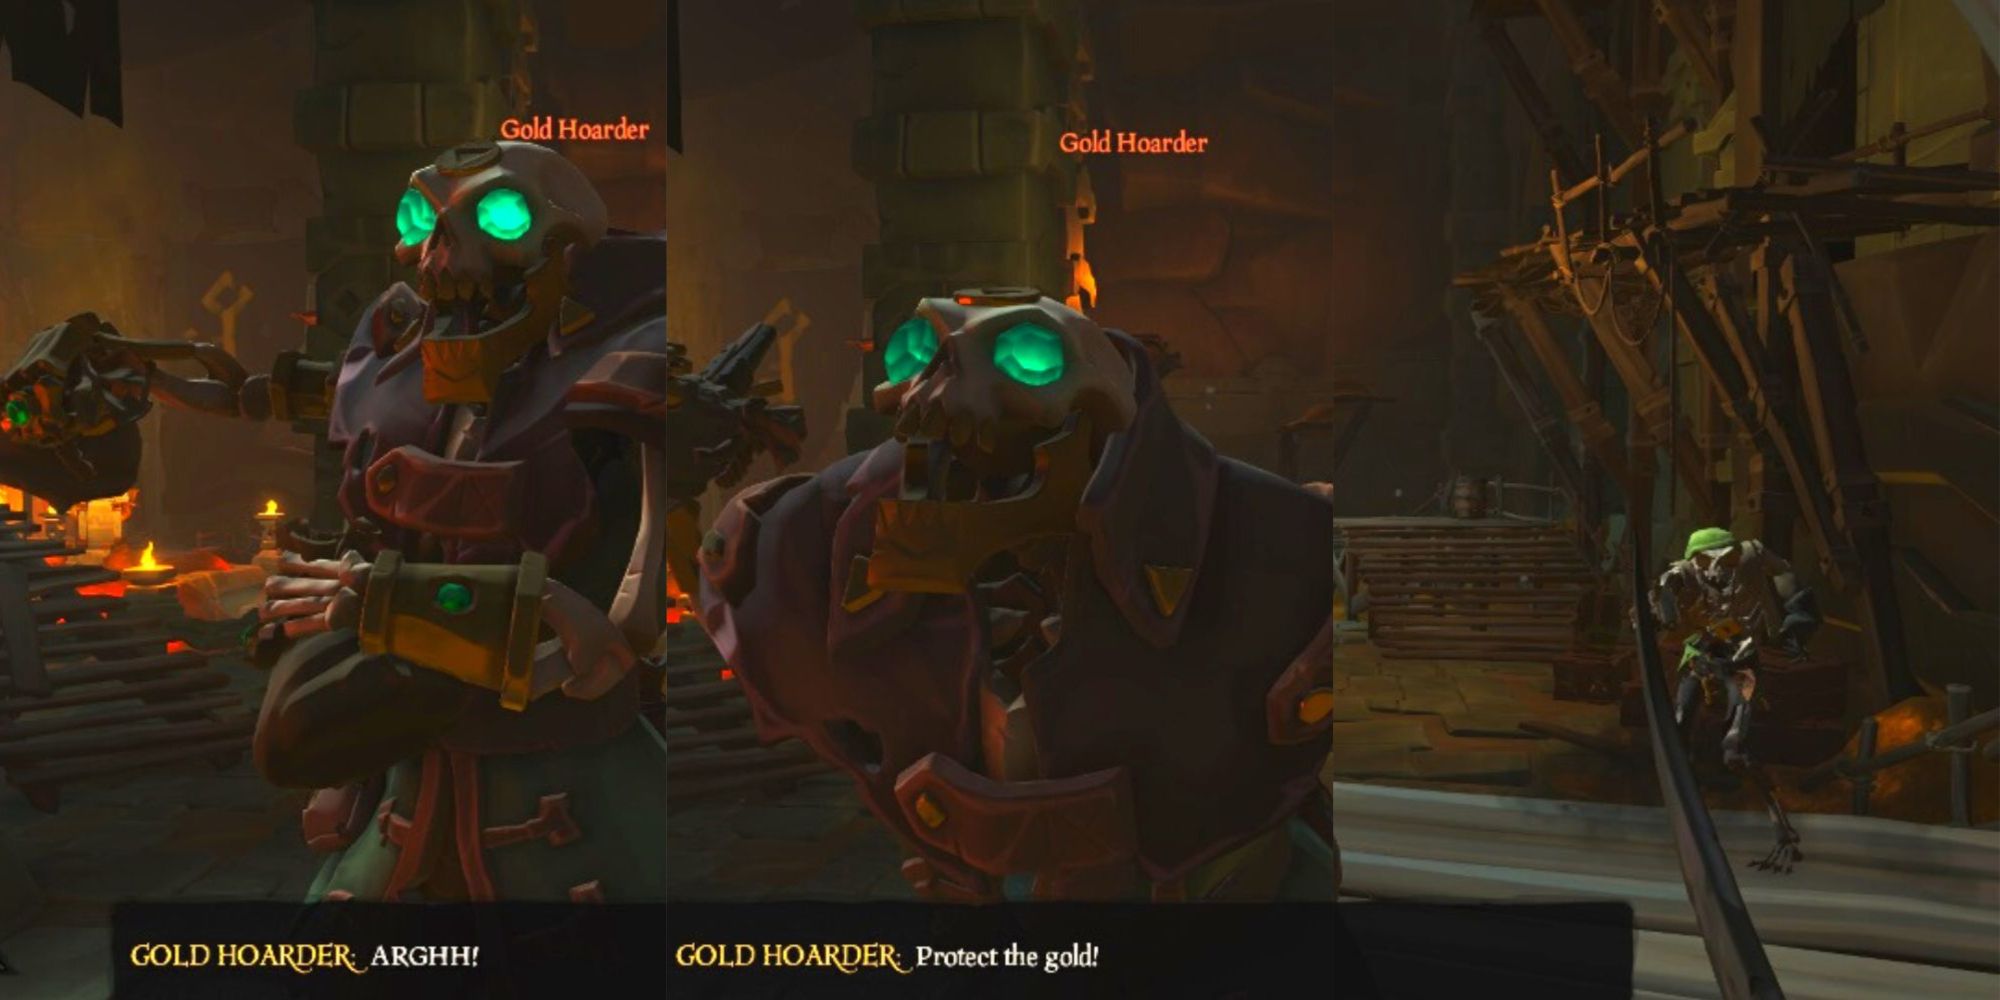 The Gold Hoarder And His Skeleton Minions In The Shores Of Gold Boss Battle In Sea Of Thieves